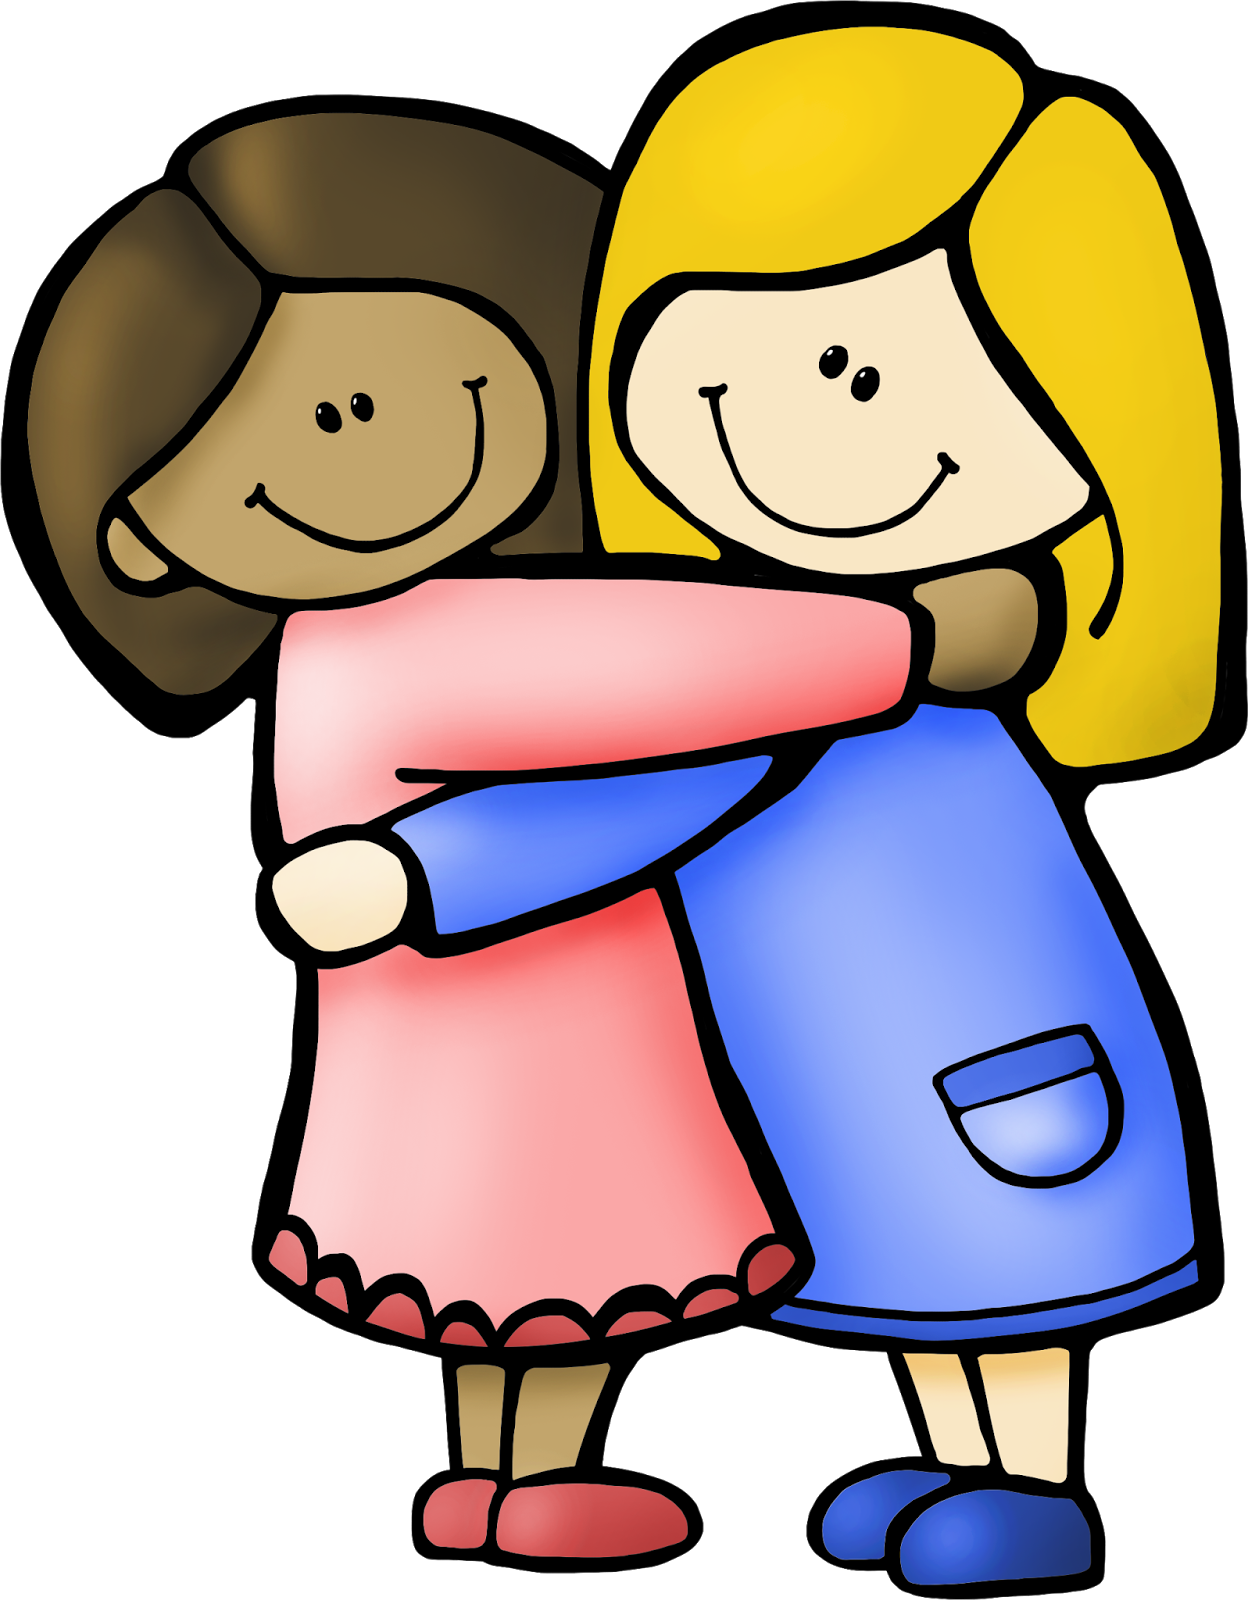 Whimsy workshop teaching communication. Lds clipart friend